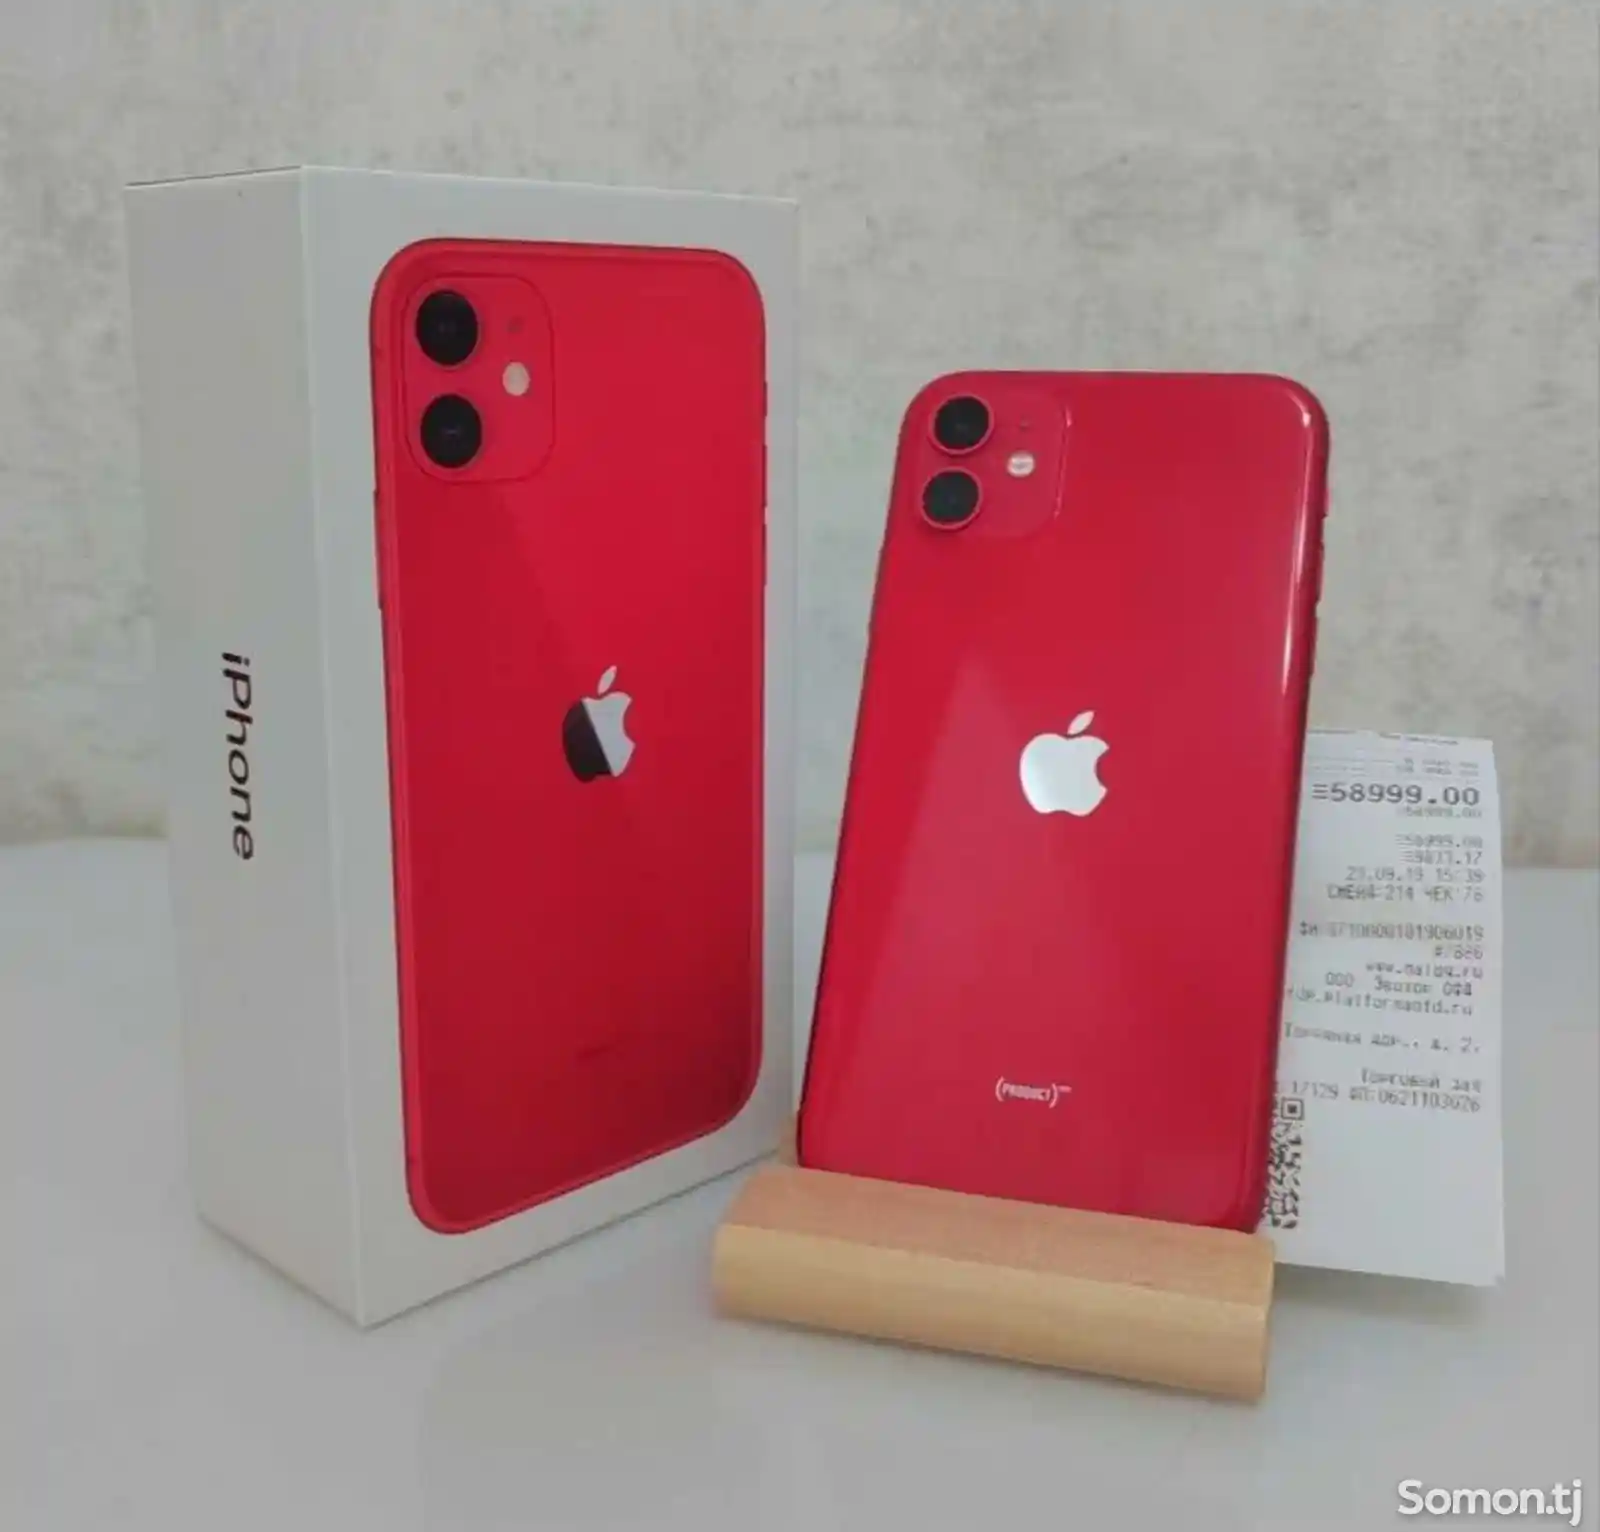 Apple iPhone 11, 64 gb, Product Red-1